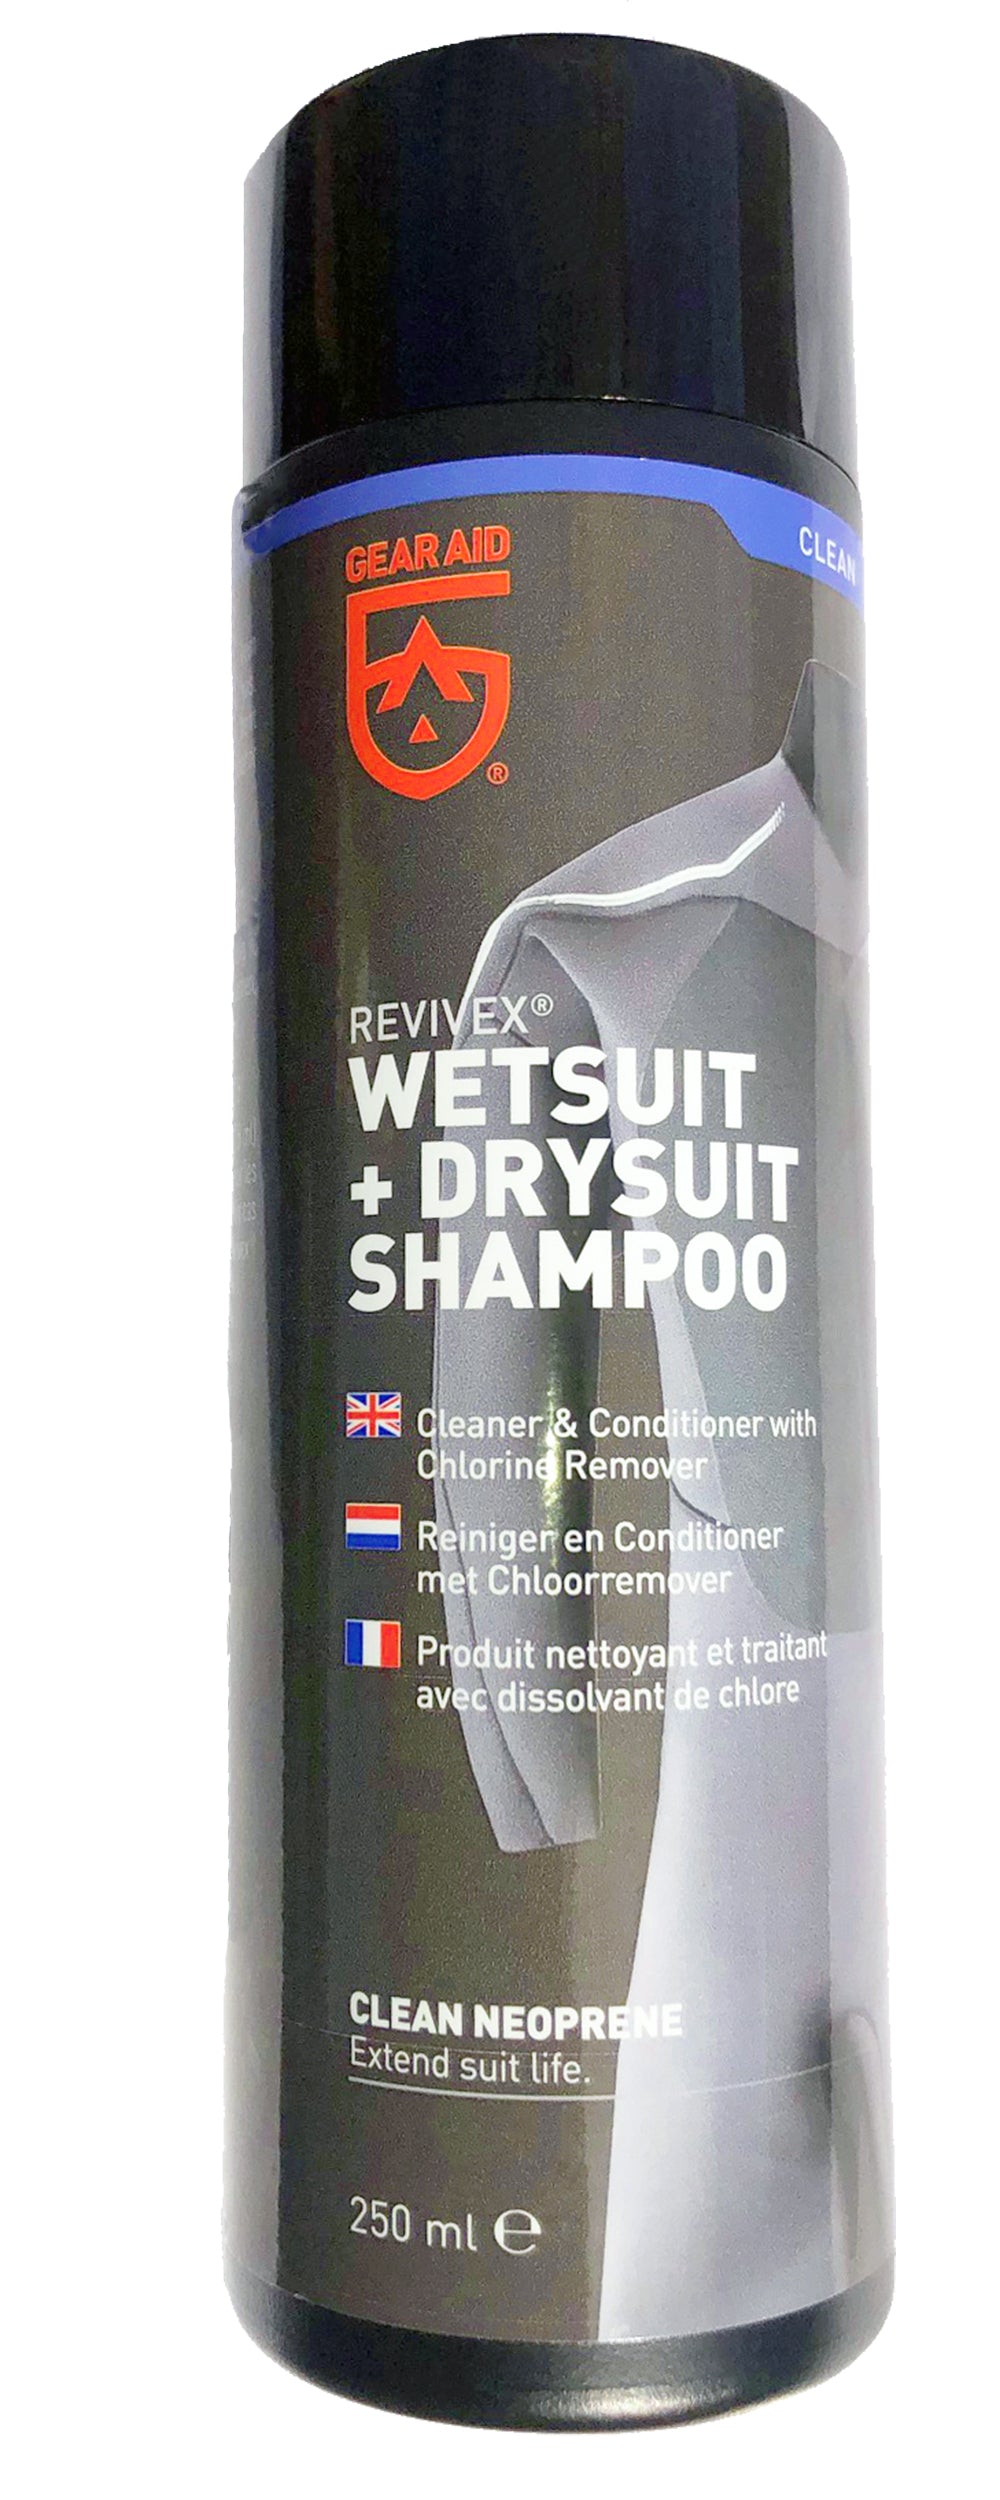 GEAR AID WETSUIT AND DRYSUIT SHAMPOO